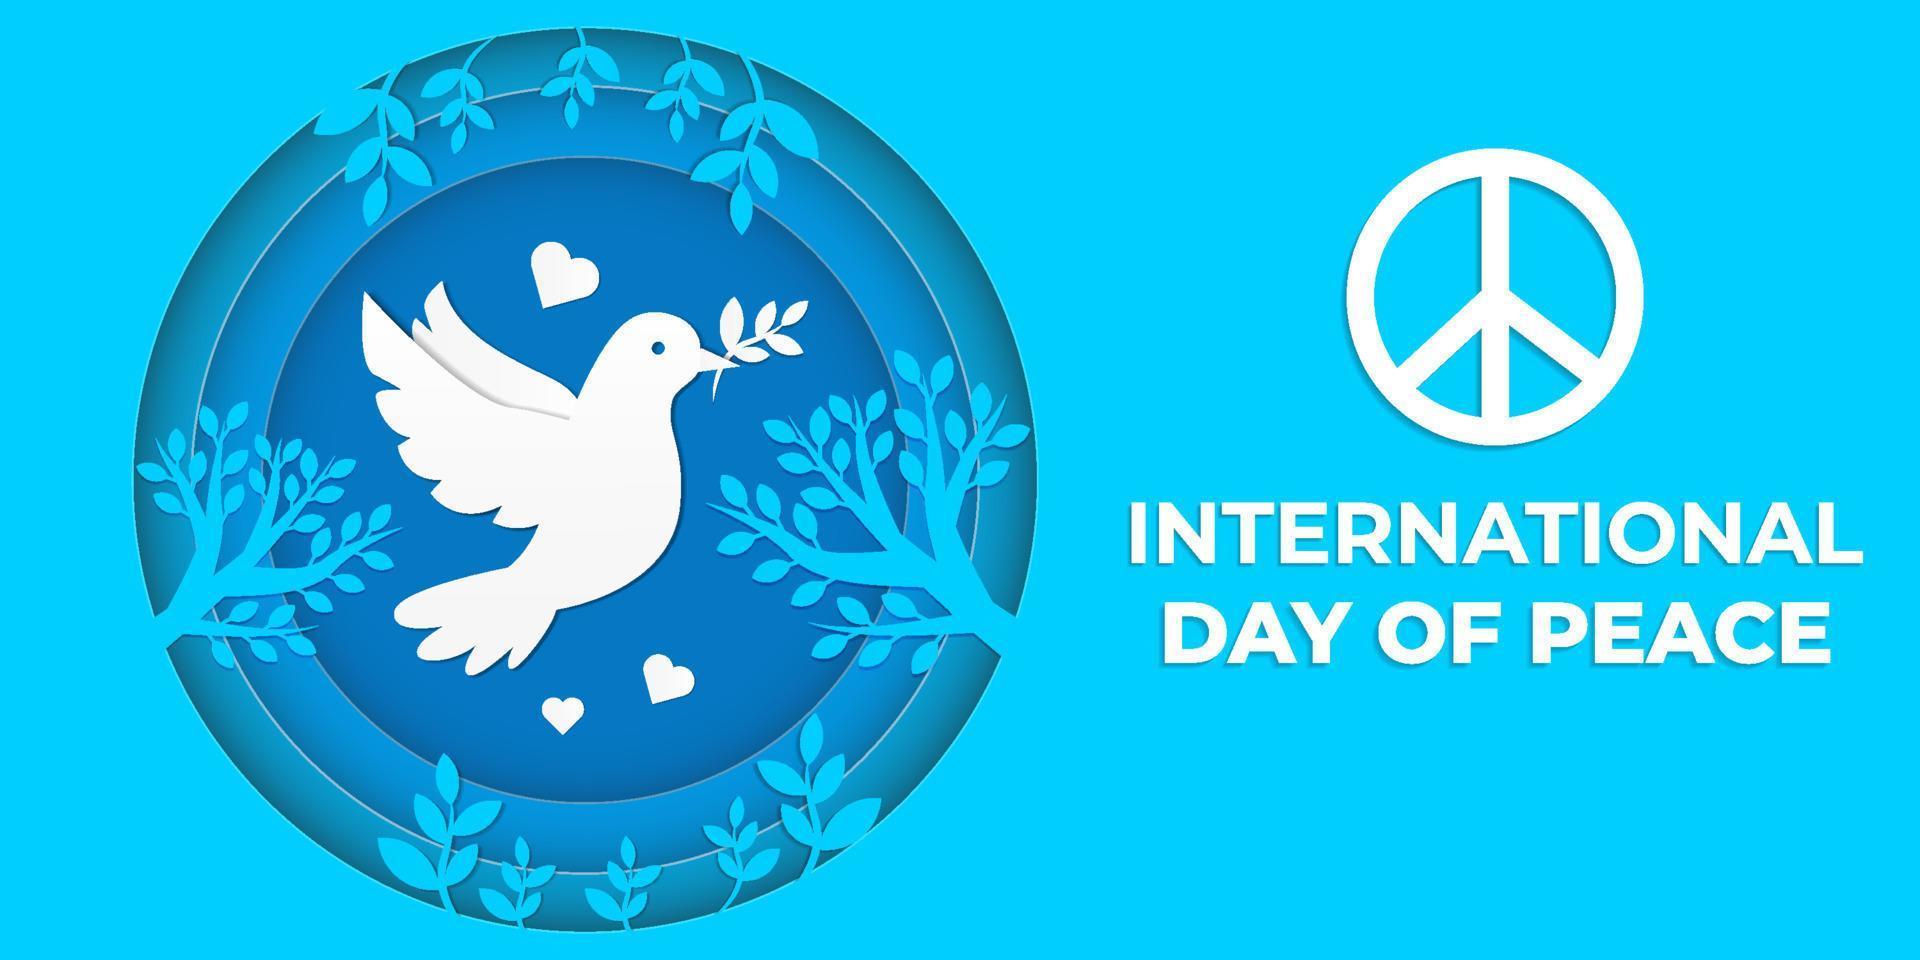 international day of peace in paper cut art style vector